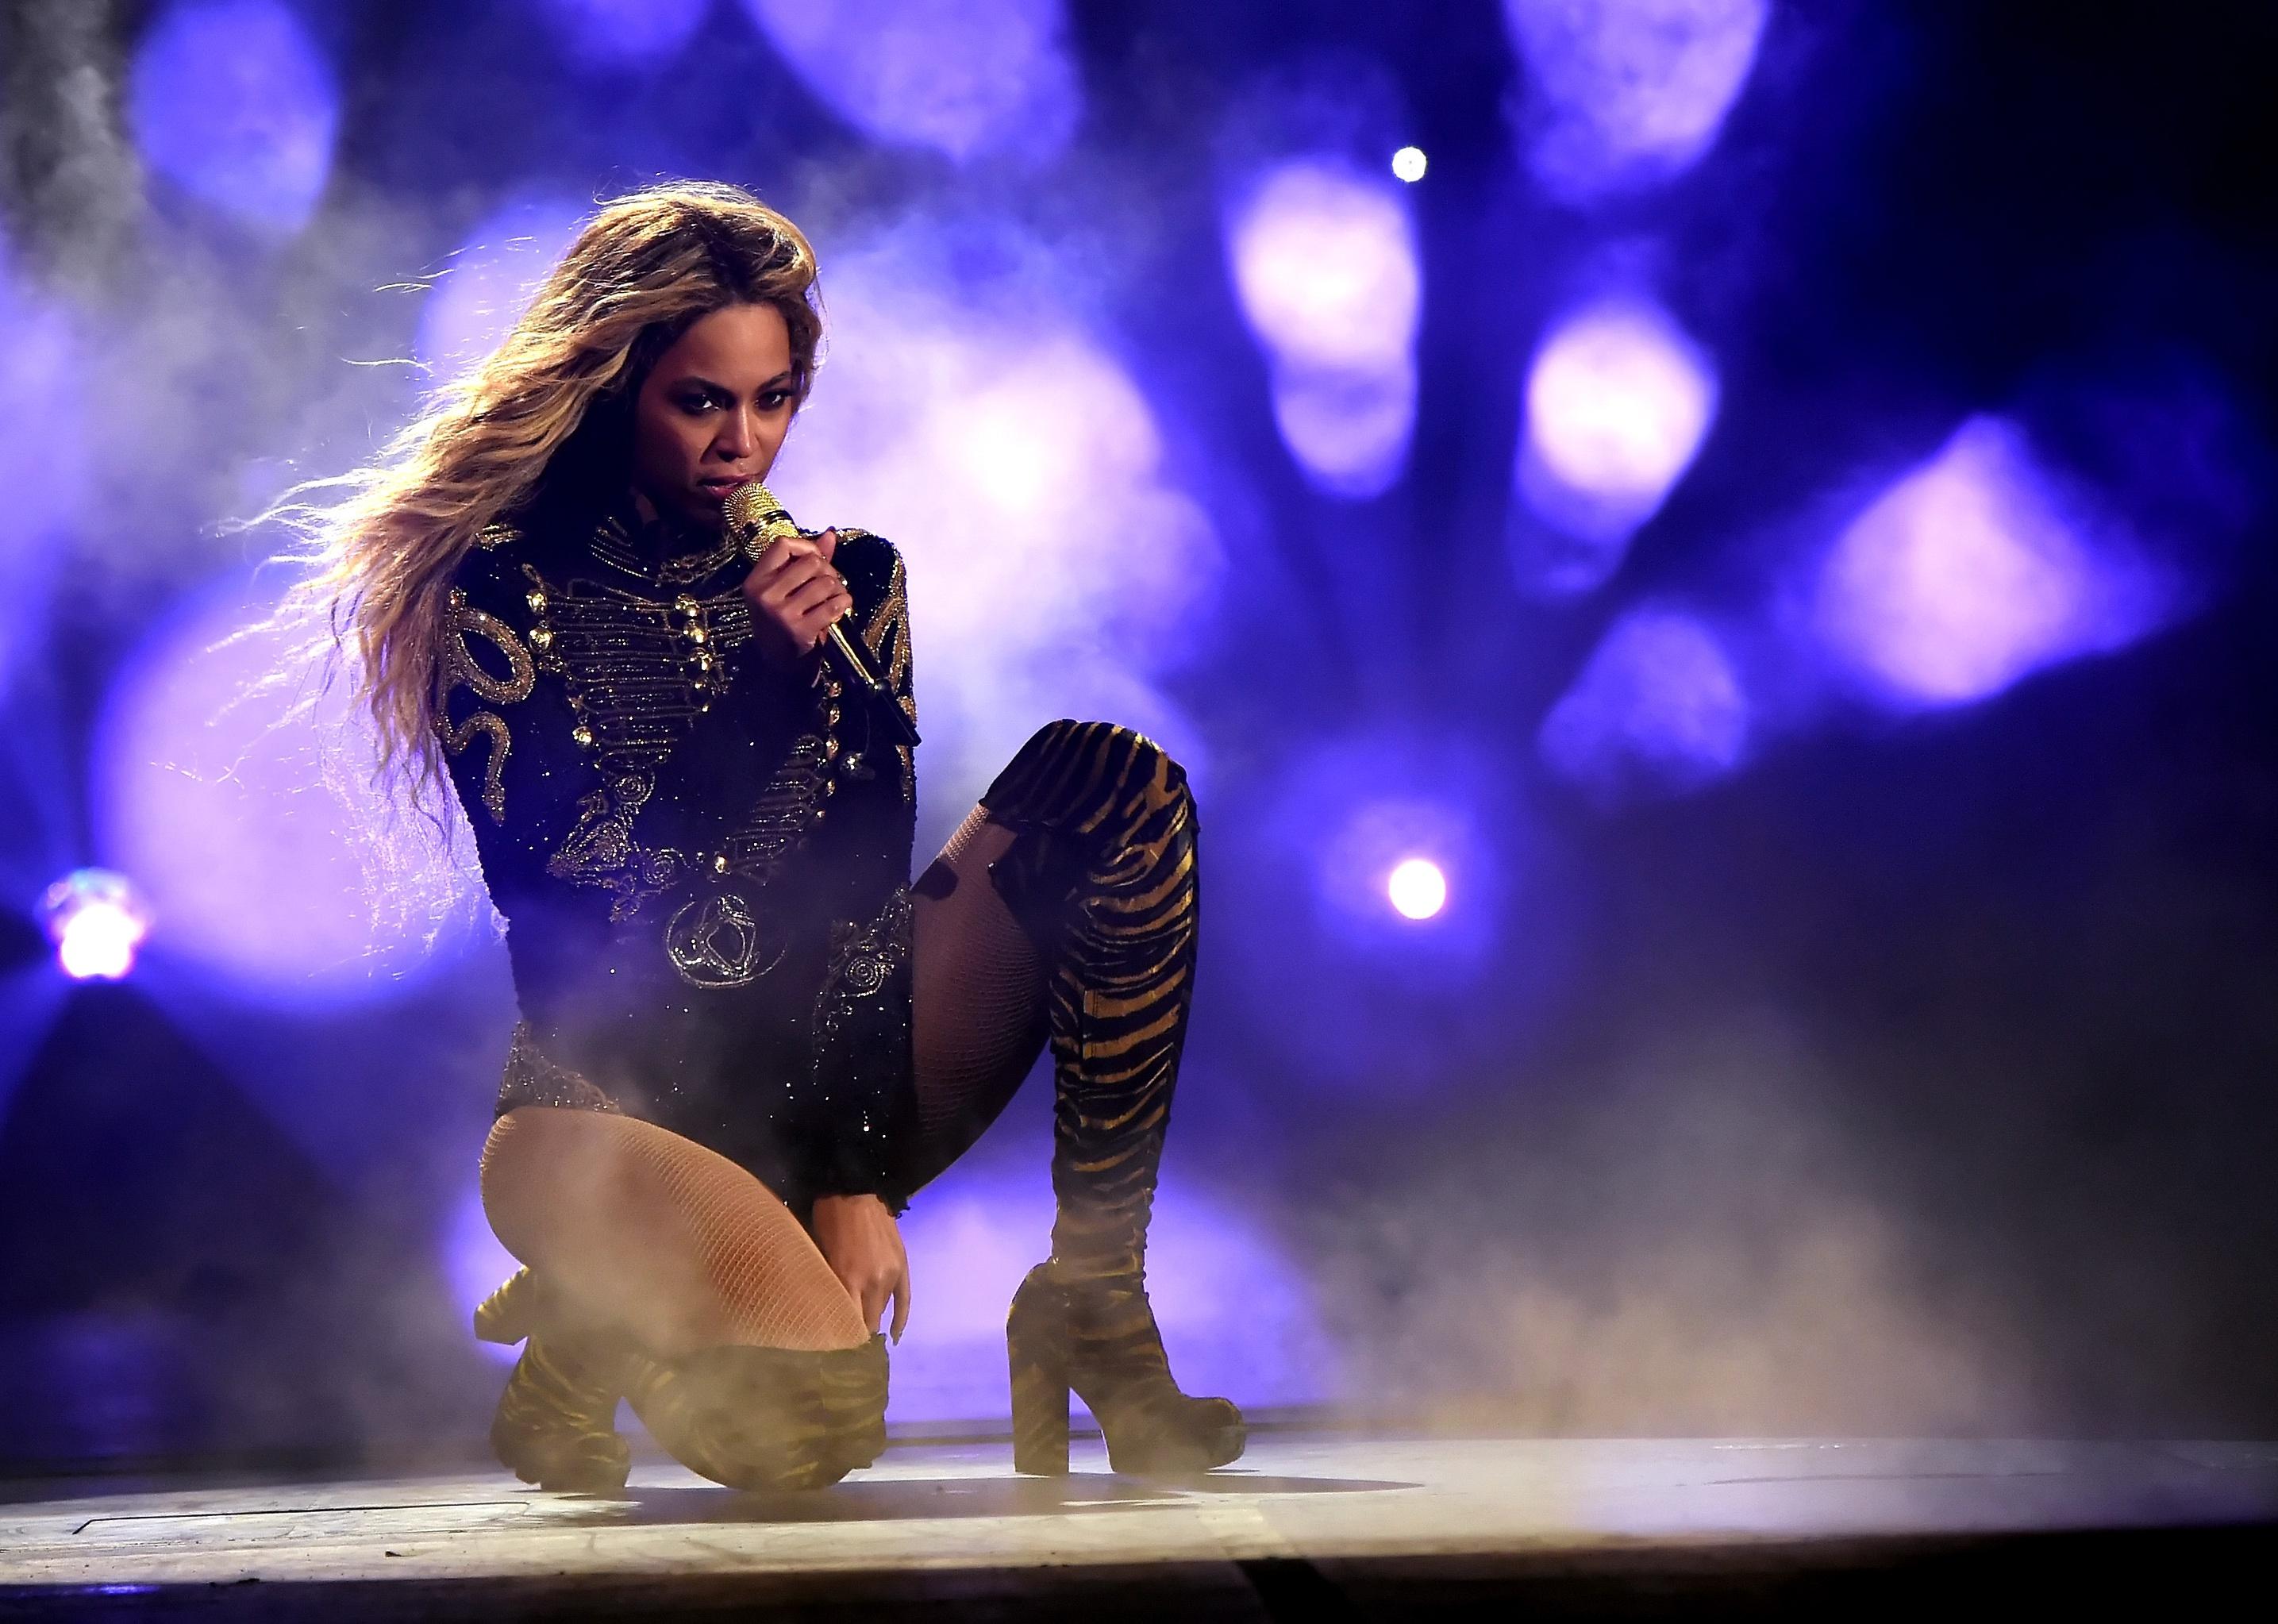 <p>Beyoncé followed a <a href="https://www.vox.com/2016/2/7/10934576/beyonce-super-bowl-halftime-2016-coldplay">famous performance at the Super Bowl 50 halftime show</a> with this global stadium tour in support of her chart-topping album "Lemonade." Each show unfolded in narrative chapters and employed a huge LED screen, various audio-visual props, multiple costumes, socio-political themes, and exhilarating dance numbers. She was later named by Pollstar as the <a href="https://preview.houstonchronicle.com/music/beyonce-is-pollstar-s-top-touring-artist-of-the-16257934">top touring artist of the last decade</a>.</p>